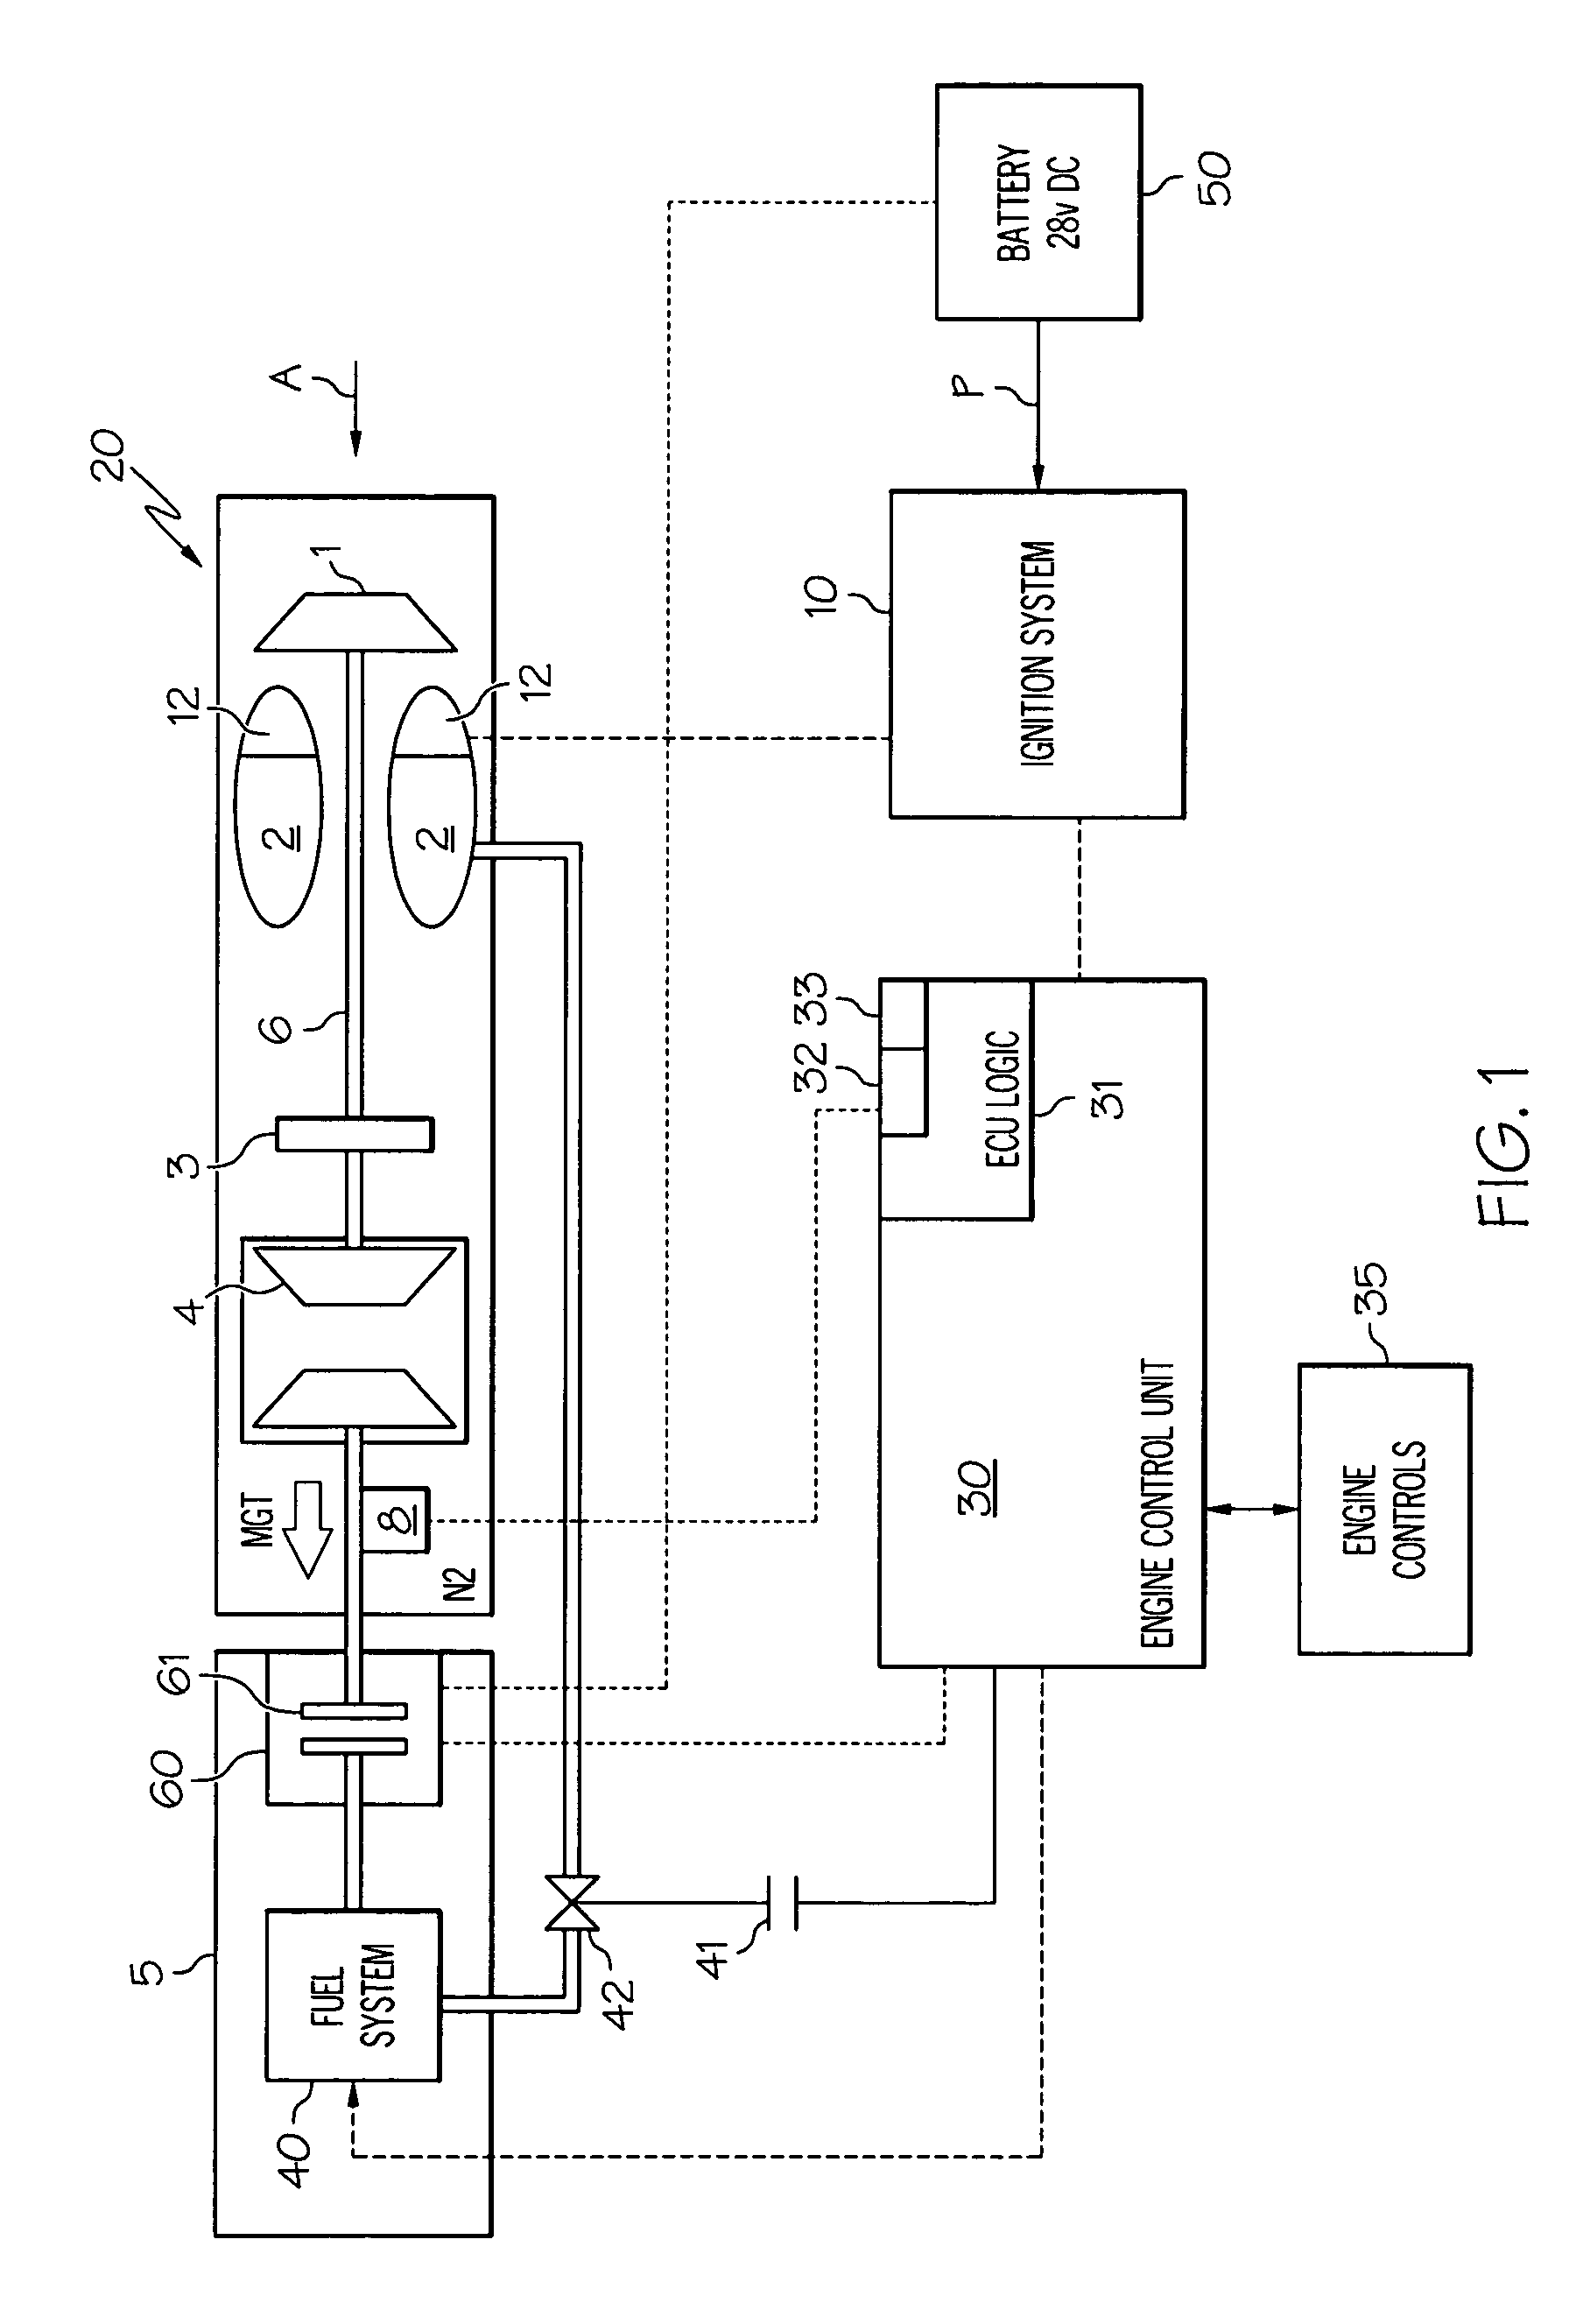 Methods and systems for turbine line replaceable unit fault detection and isolation during engine startup